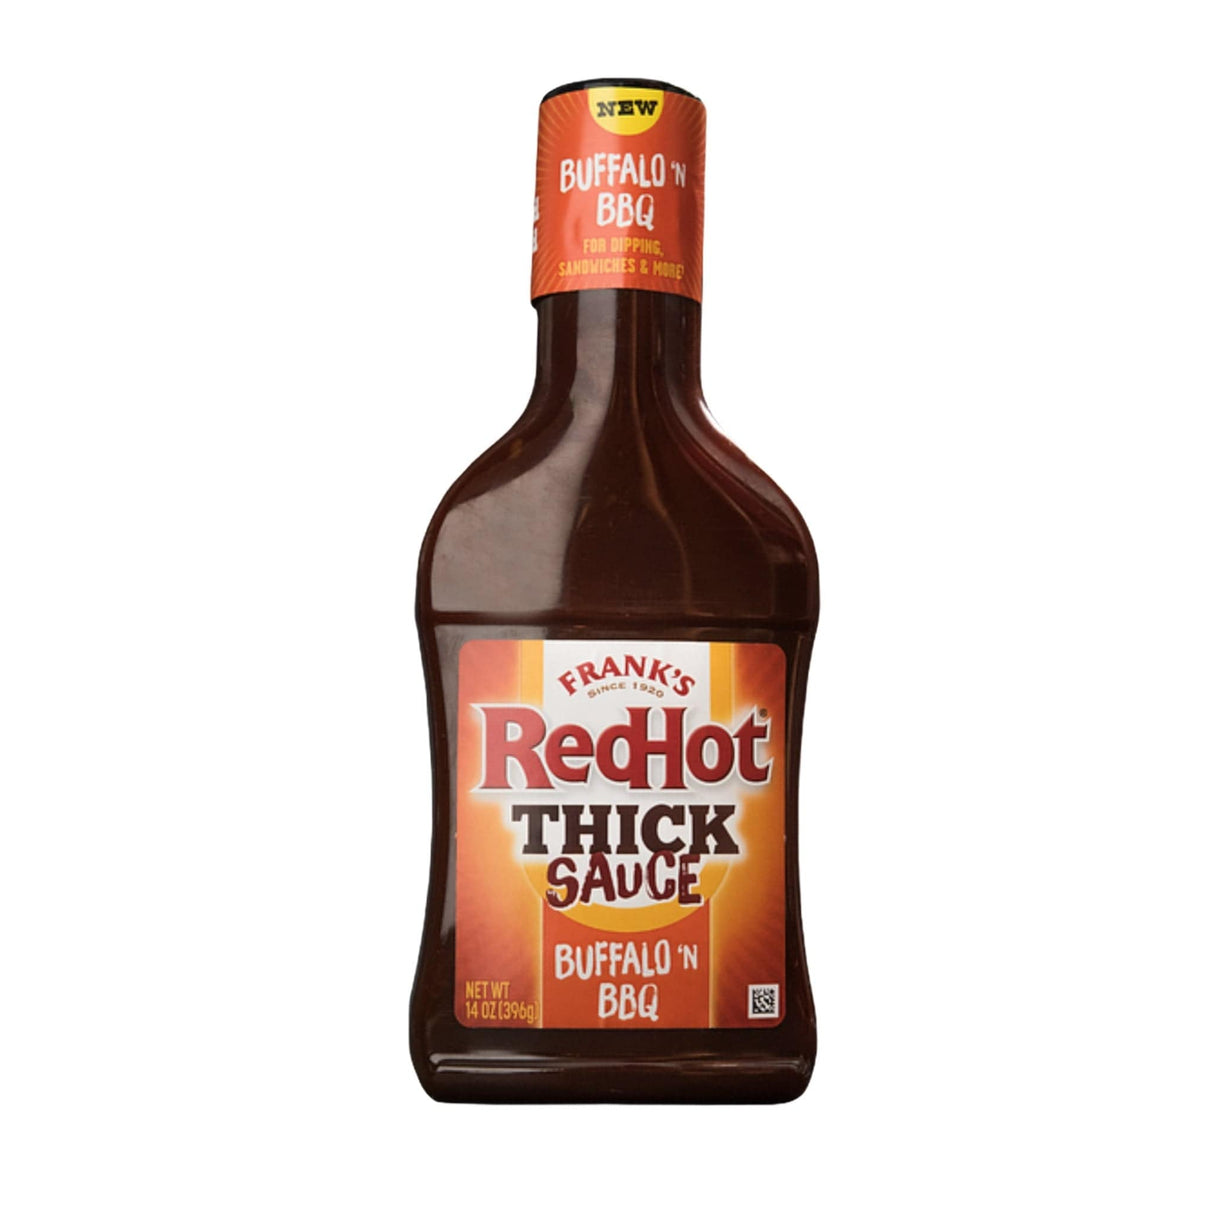 Frank's RedHot Thick Sauce Buffalo 'N BBQ - hot sauce market & more